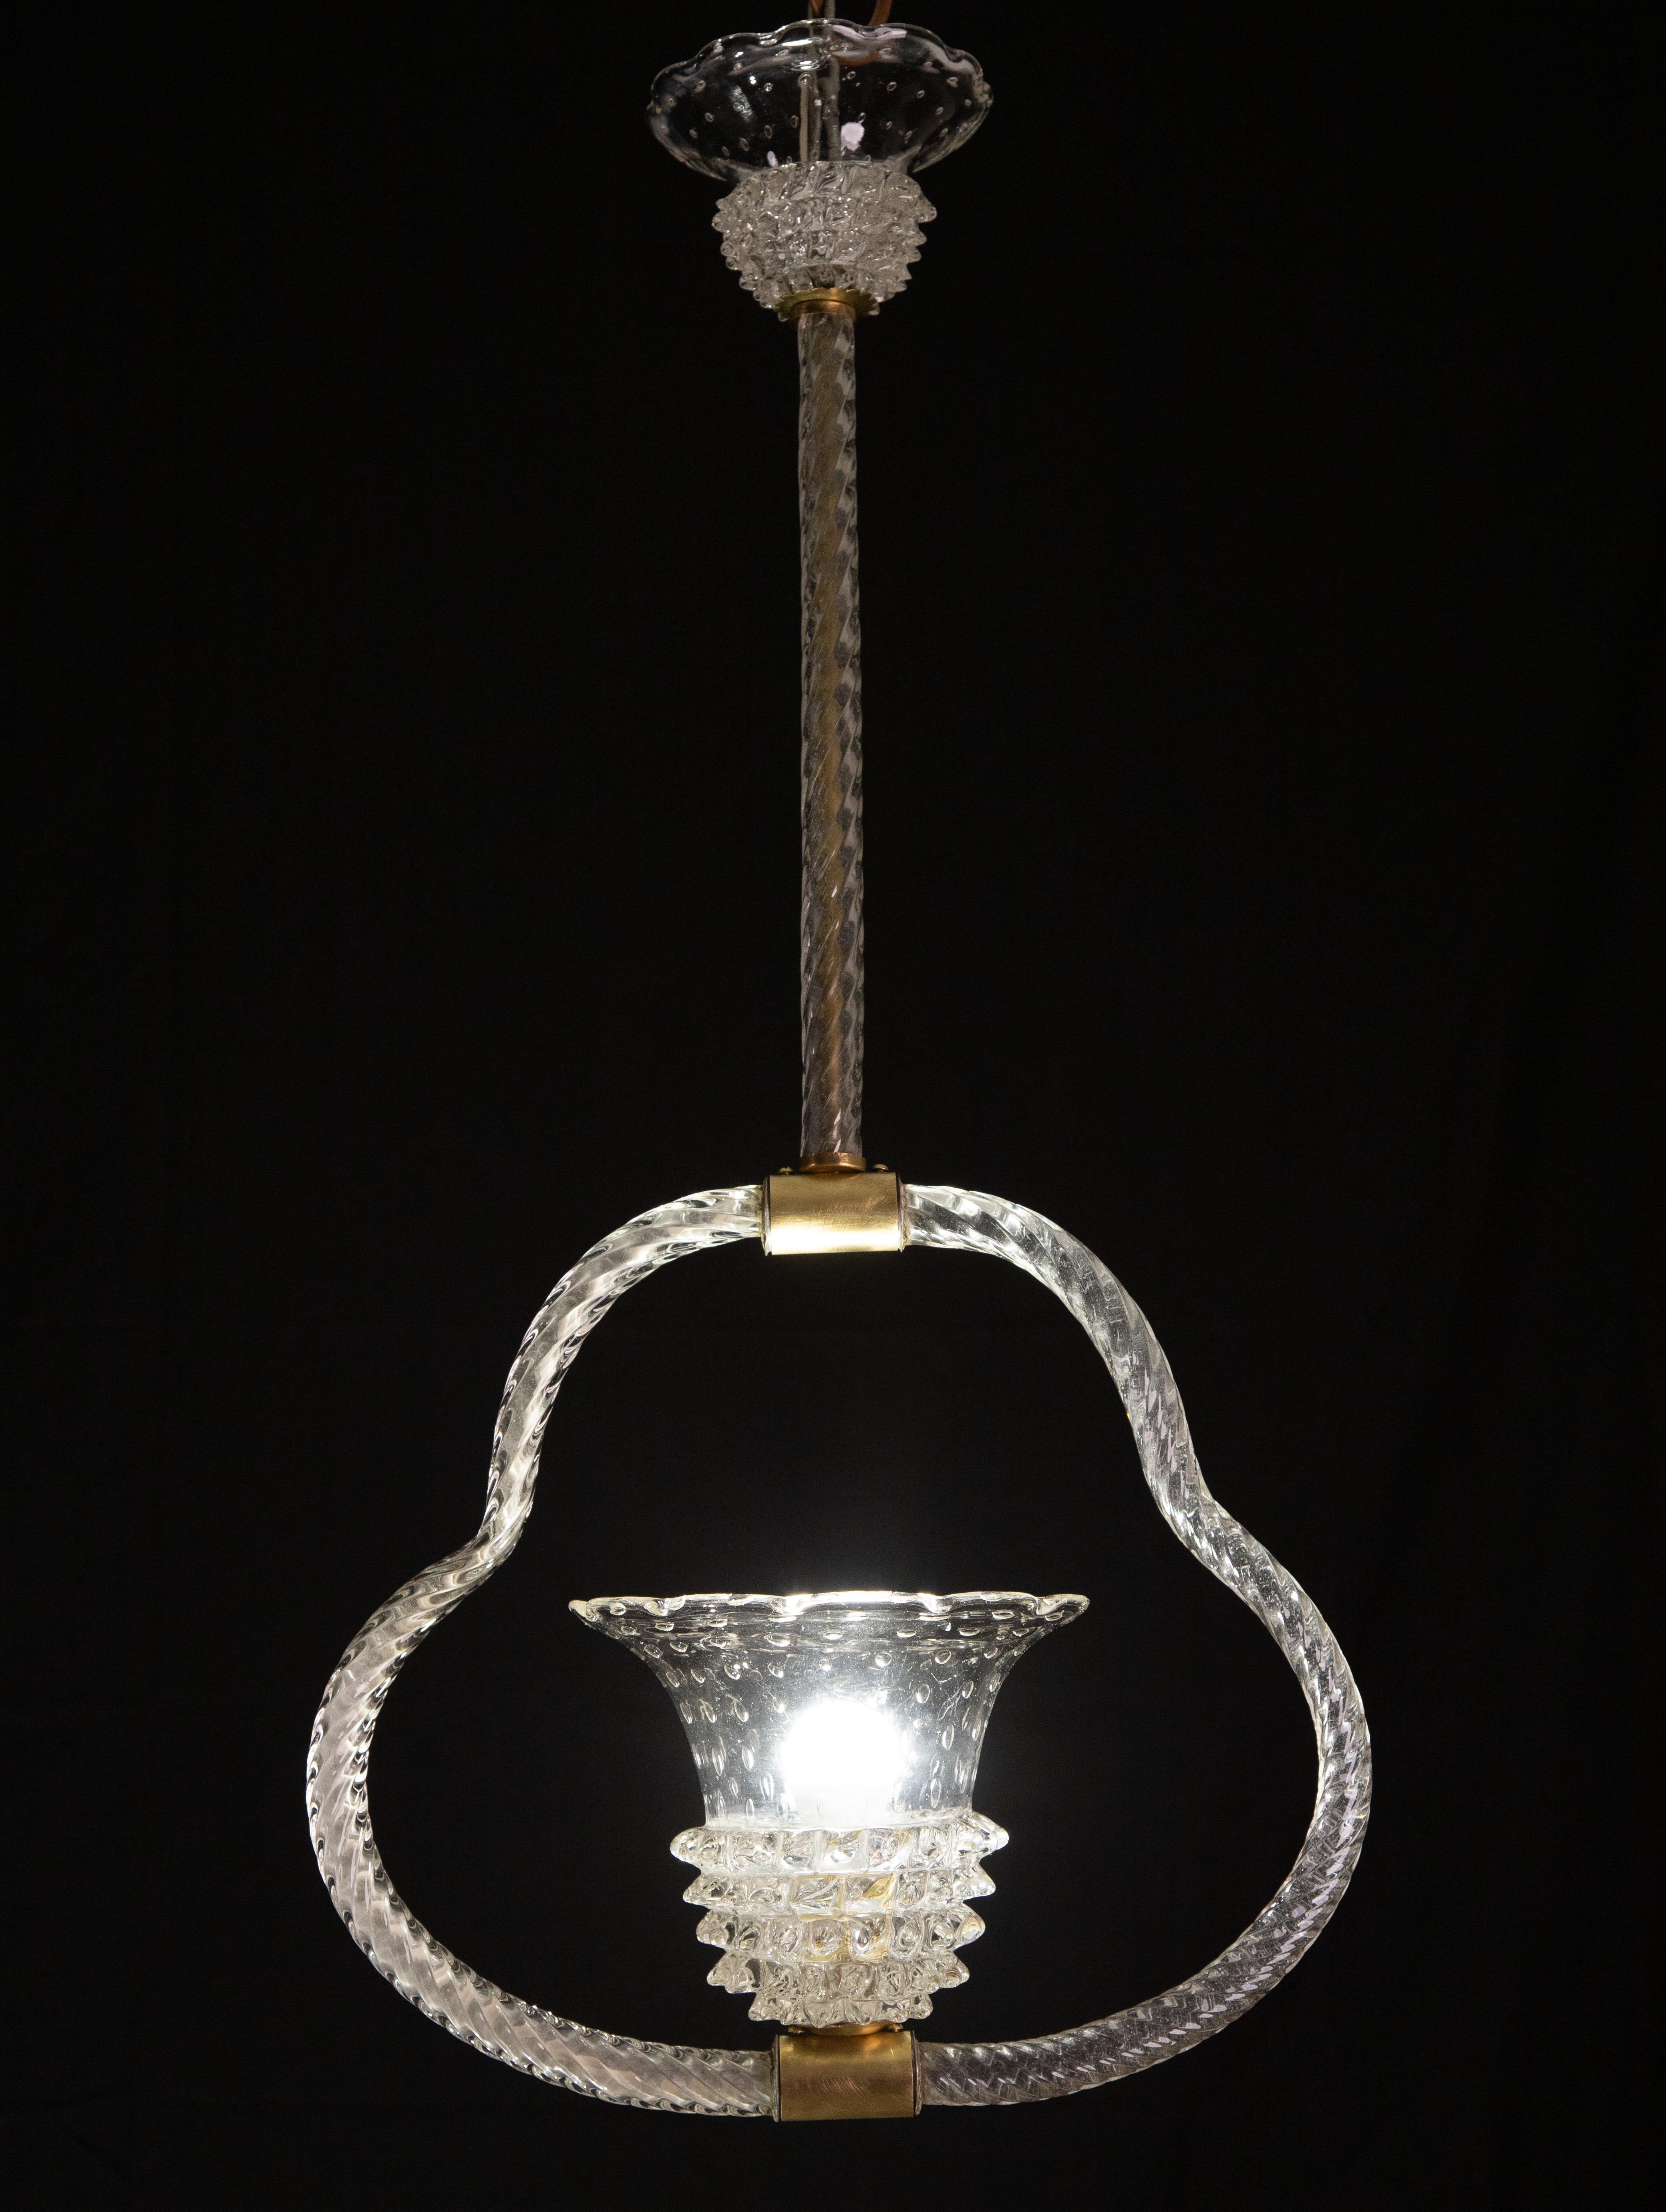 Murano Glass Chandelier from Barovier e Toso.

Period: 1940s

Very Rare for the Rostrato and Bullicante glass of the central cup, a unique piece of design.

Height 90 cm, diameter 45 centimetres.